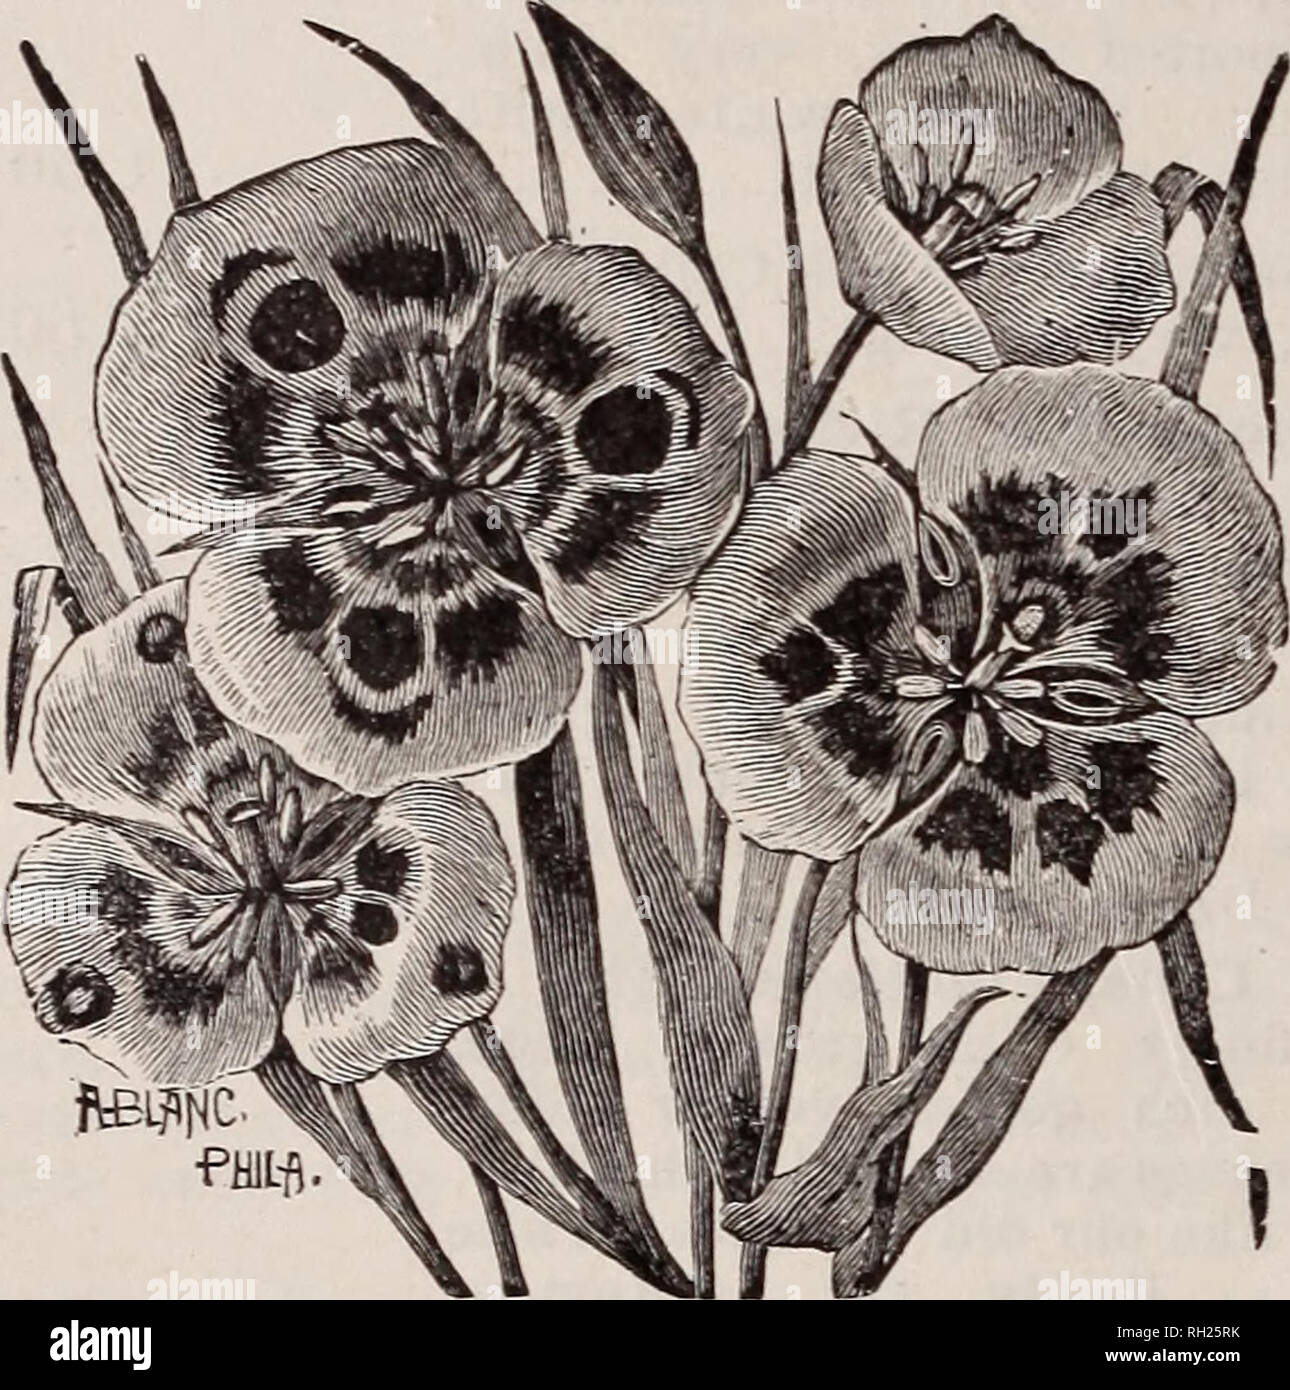 . Bulbs : for fall and winter planting. Horticulture Catalogs; Bulbs (Plants) Seeds Catalogs. 10 THE GERMAIN SEED CO. Calochortus: Continued. Venustus Oculatus, white, cream, lilac or purple, habit similar to the above E&amp;Ch variety 5 Venustus Pictus, a creamy white, brilliantly marked, often with a gold blotch 5 Venustus Purpurascens, purplish lilac outside and top of petals, creamy white half way, purple in center, beautiful eye at center of each petal. Flowers full 3 inches across 5 Venustus Roseus, a creamy white or lilac with an eye midway and a rose col- olored blotch at apex 5. CALOC Stock Photo